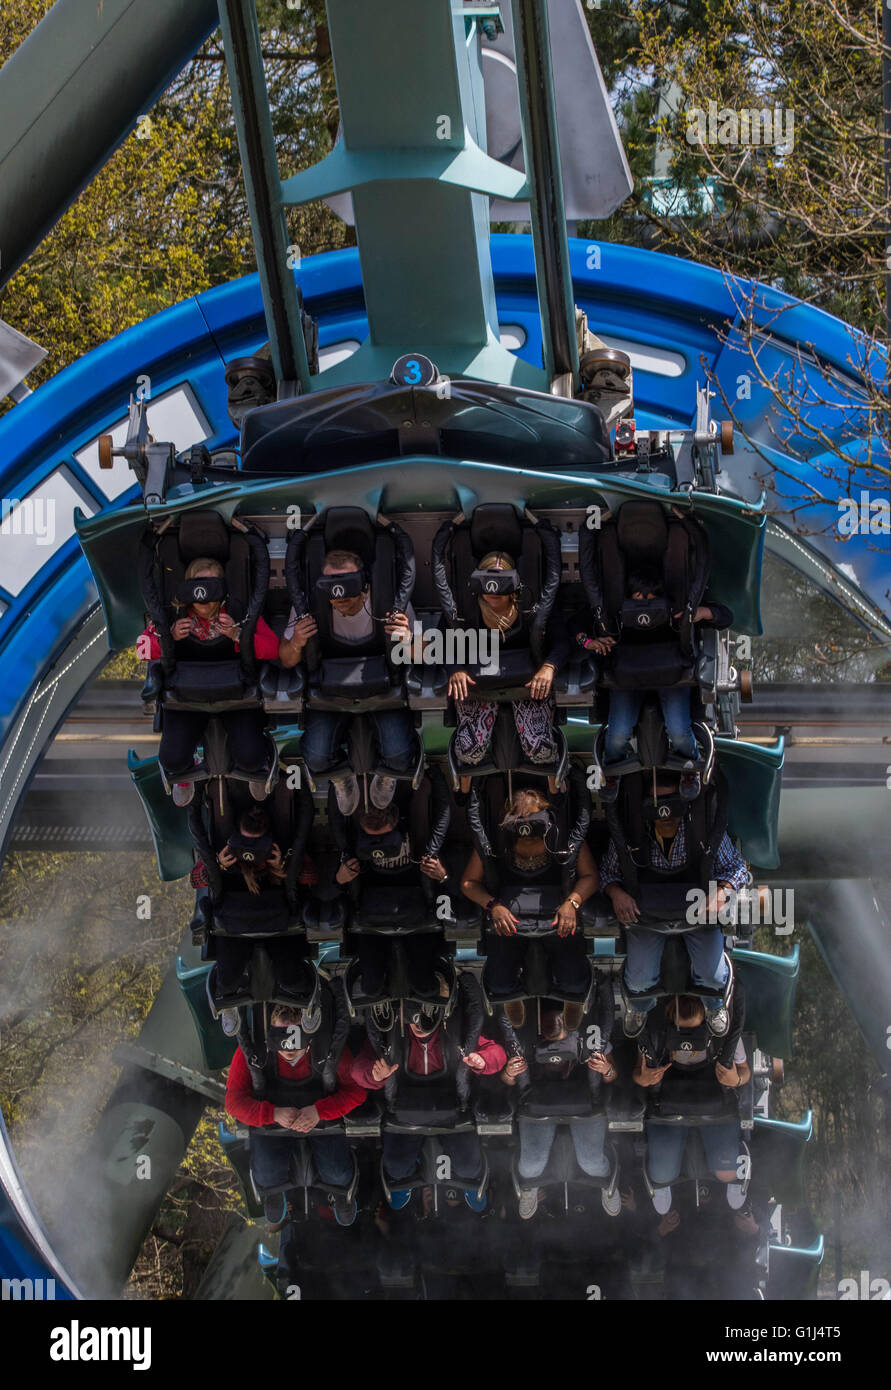 Alton Towers New VR Rollercoaster Air galactica , Riders Flying Though Space with a VR HEad On Rollercoaster Stock Photo